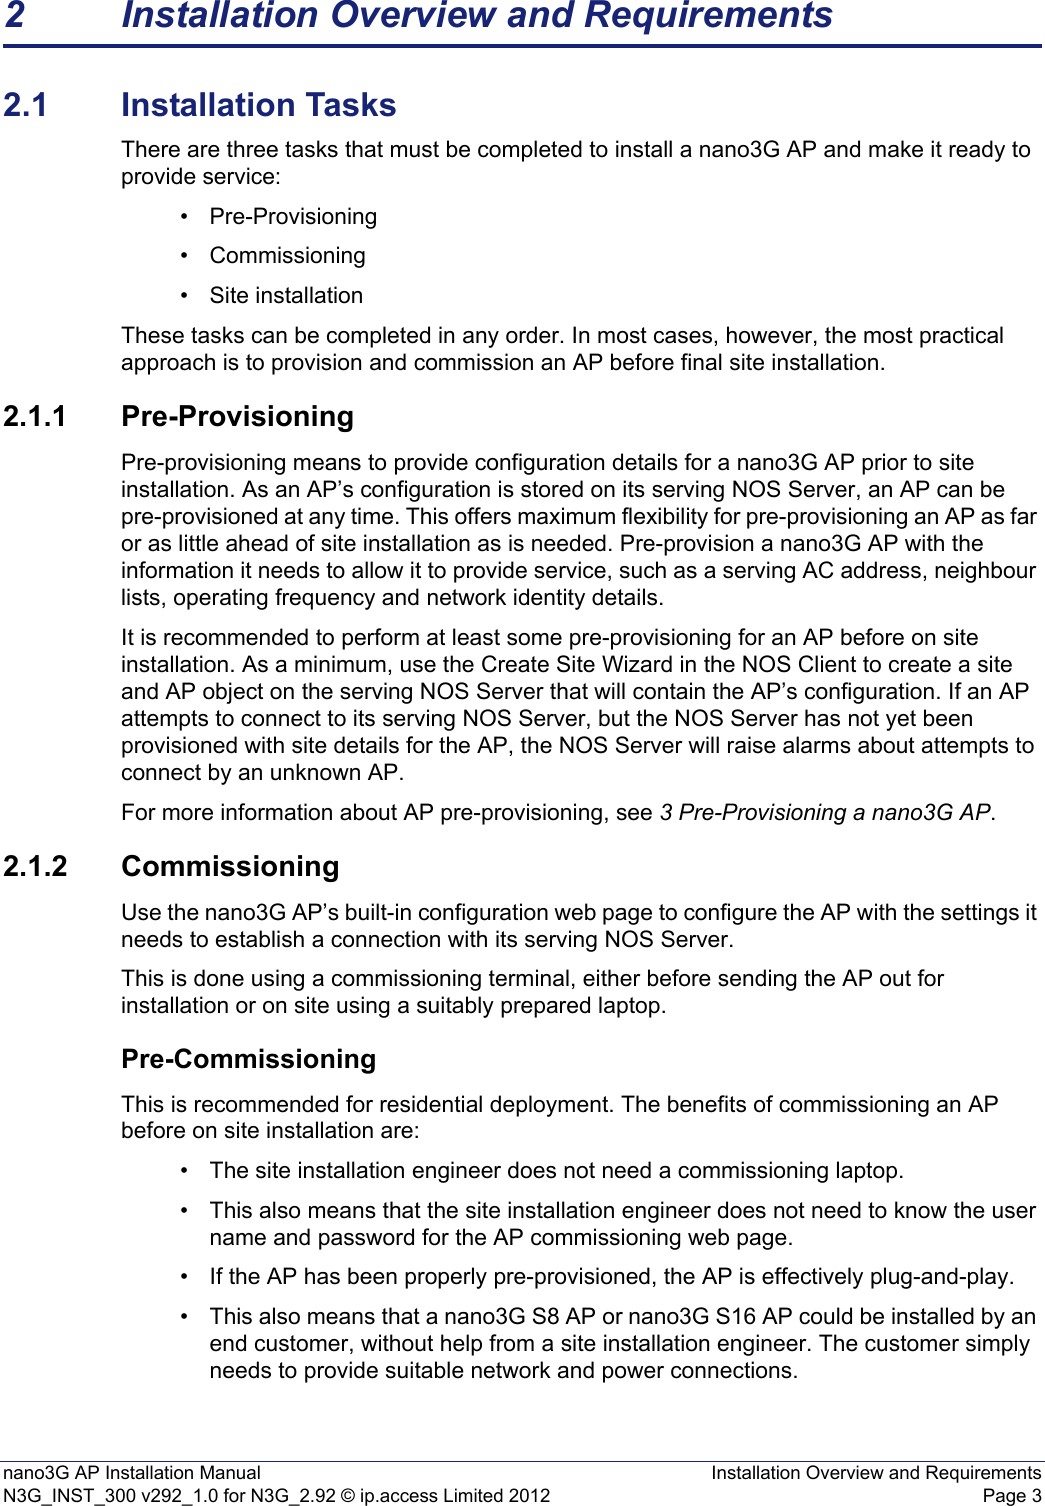 nano3G AP Installation Manual Installation Overview and RequirementsN3G_INST_300 v292_1.0 for N3G_2.92 © ip.access Limited 2012 Page 32 Installation Overview and Requirements2.1 Installation TasksThere are three tasks that must be completed to install a nano3G AP and make it ready to provide service: • Pre-Provisioning• Commissioning • Site installation These tasks can be completed in any order. In most cases, however, the most practical approach is to provision and commission an AP before final site installation. 2.1.1 Pre-ProvisioningPre-provisioning means to provide configuration details for a nano3G AP prior to site installation. As an AP’s configuration is stored on its serving NOS Server, an AP can be pre-provisioned at any time. This offers maximum flexibility for pre-provisioning an AP as far or as little ahead of site installation as is needed. Pre-provision a nano3G AP with the information it needs to allow it to provide service, such as a serving AC address, neighbour lists, operating frequency and network identity details.It is recommended to perform at least some pre-provisioning for an AP before on site installation. As a minimum, use the Create Site Wizard in the NOS Client to create a site and AP object on the serving NOS Server that will contain the AP’s configuration. If an AP attempts to connect to its serving NOS Server, but the NOS Server has not yet been provisioned with site details for the AP, the NOS Server will raise alarms about attempts to connect by an unknown AP.For more information about AP pre-provisioning, see 3 Pre-Provisioning a nano3G AP. 2.1.2 CommissioningUse the nano3G AP’s built-in configuration web page to configure the AP with the settings it needs to establish a connection with its serving NOS Server.This is done using a commissioning terminal, either before sending the AP out for installation or on site using a suitably prepared laptop.Pre-CommissioningThis is recommended for residential deployment. The benefits of commissioning an AP before on site installation are: • The site installation engineer does not need a commissioning laptop. • This also means that the site installation engineer does not need to know the user name and password for the AP commissioning web page. • If the AP has been properly pre-provisioned, the AP is effectively plug-and-play. • This also means that a nano3G S8 AP or nano3G S16 AP could be installed by an end customer, without help from a site installation engineer. The customer simply needs to provide suitable network and power connections.